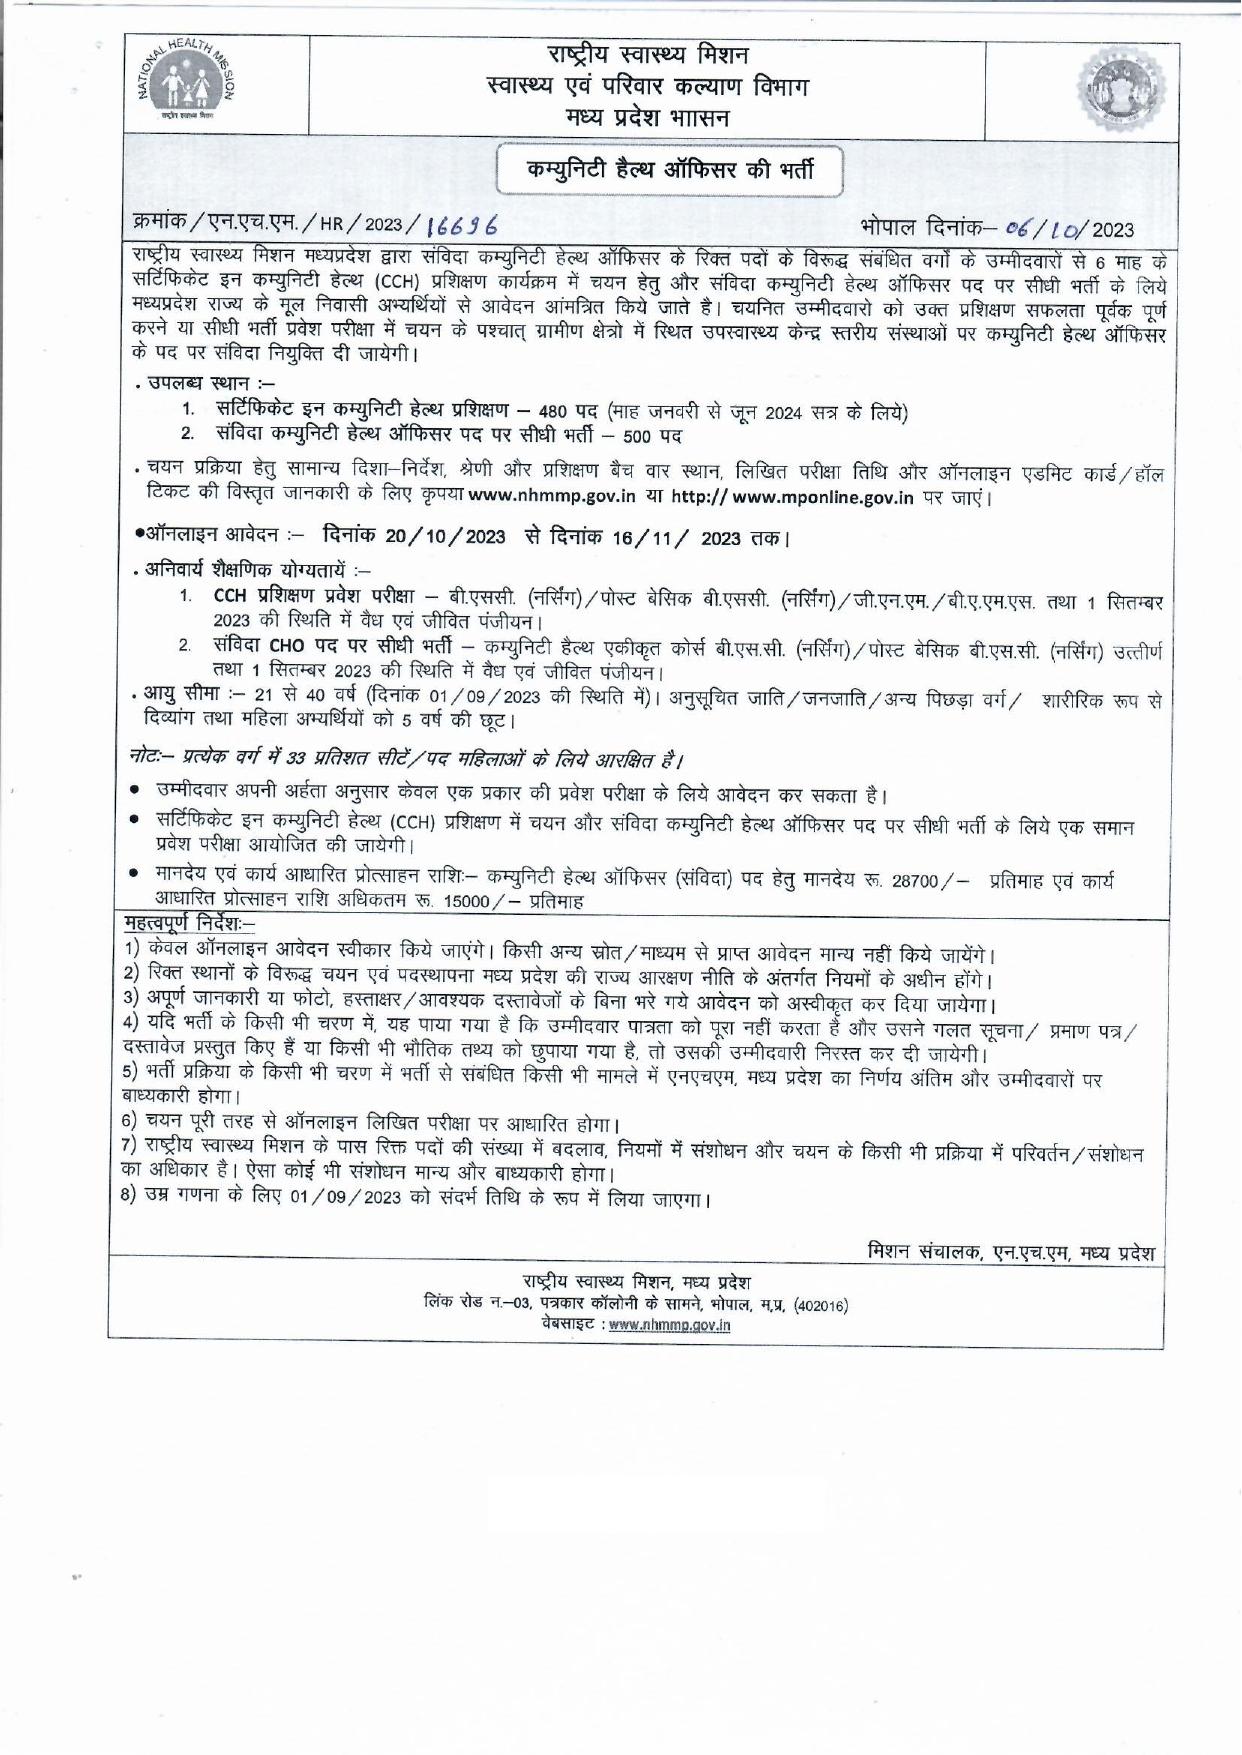 NHM MP Certificate in Community Health (CCH), Community Health Officer (CHO) Recruitment 2023 - Page 1